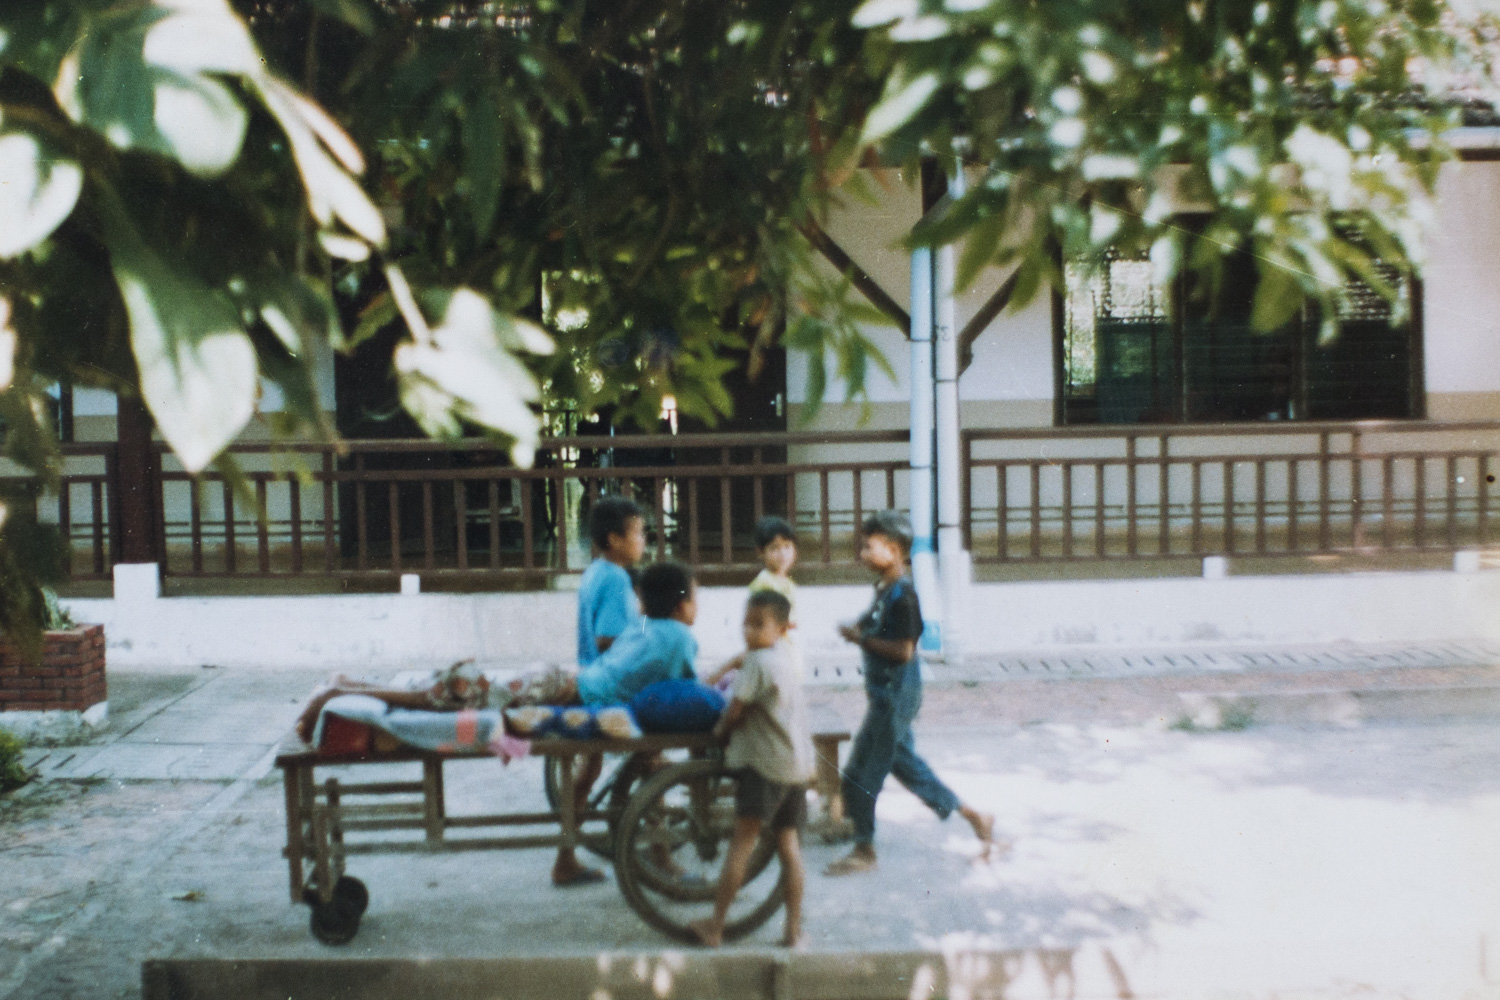 A younger Sophanna in Battambang, Cambodia, where he stayed for some time. Image courtesy of Brak Sophanna.